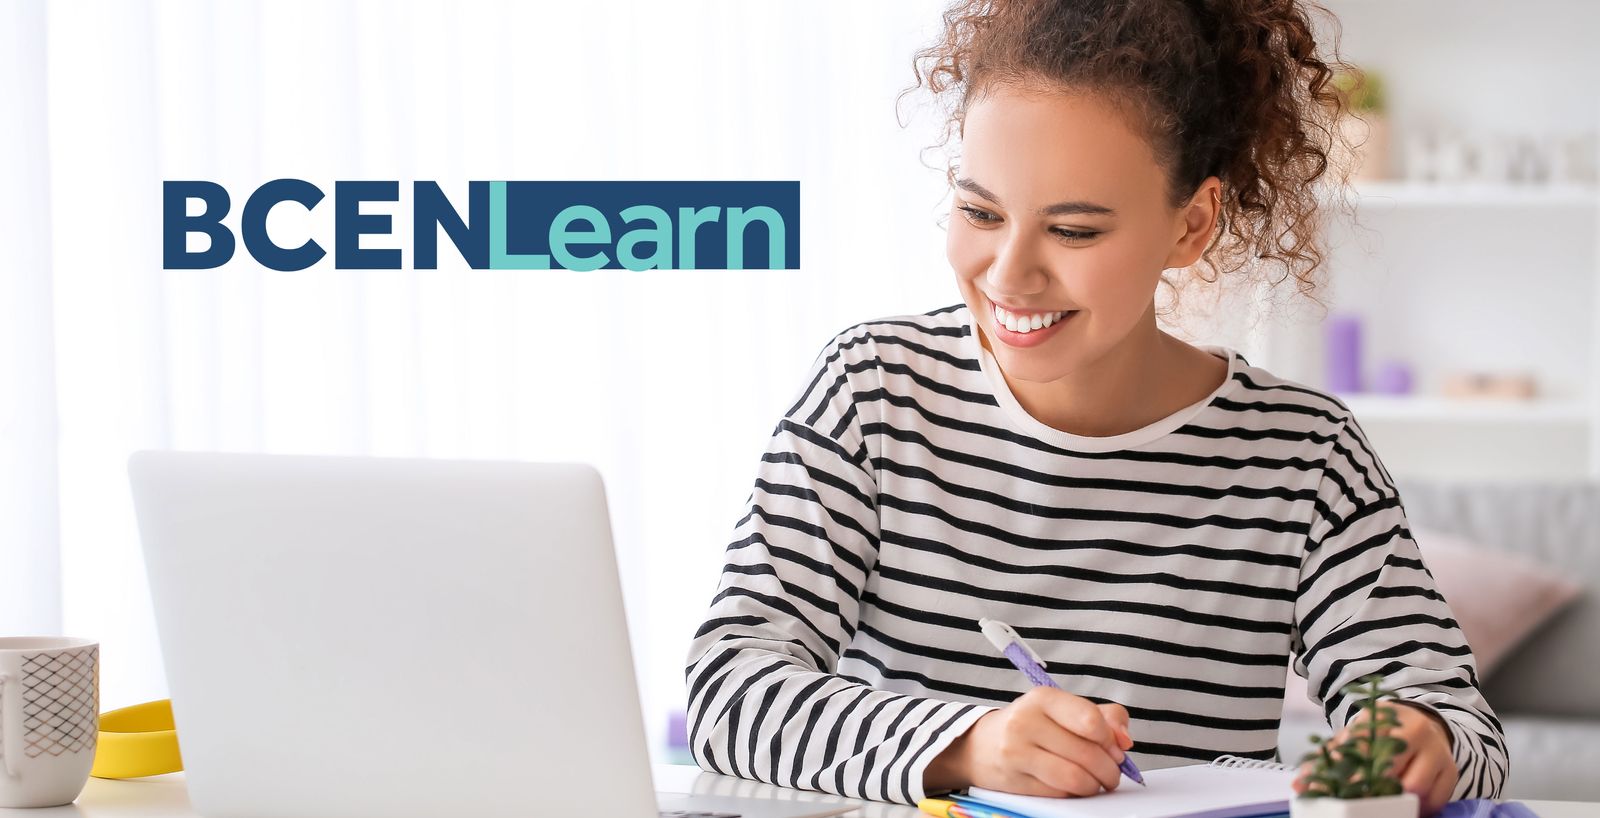 BCEN Learn Logo and image of a woman taking notes